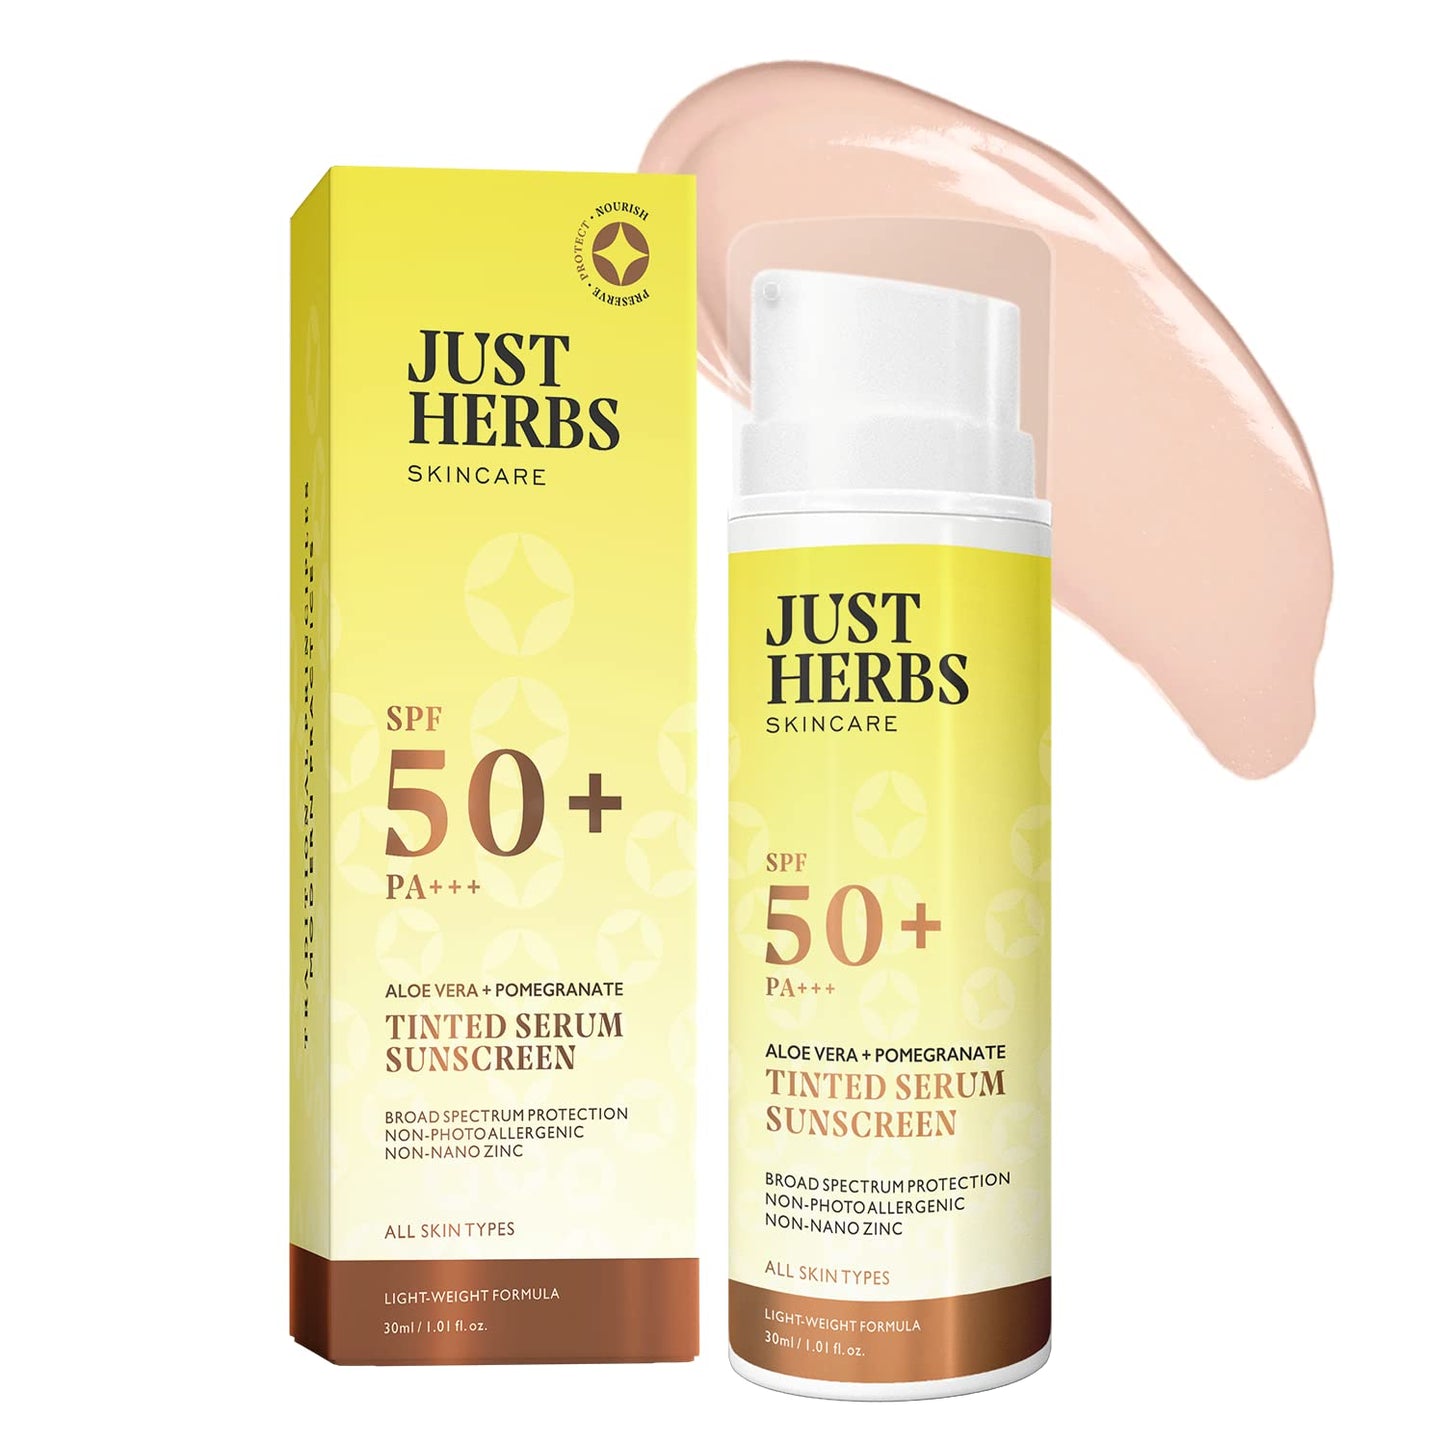 Just Herbs Tinted Sunscreen SPF 50+ PA++++ UVA/UVB Protection for Oily, Dry Skin, No White Cast for Men and Women - 30 ml